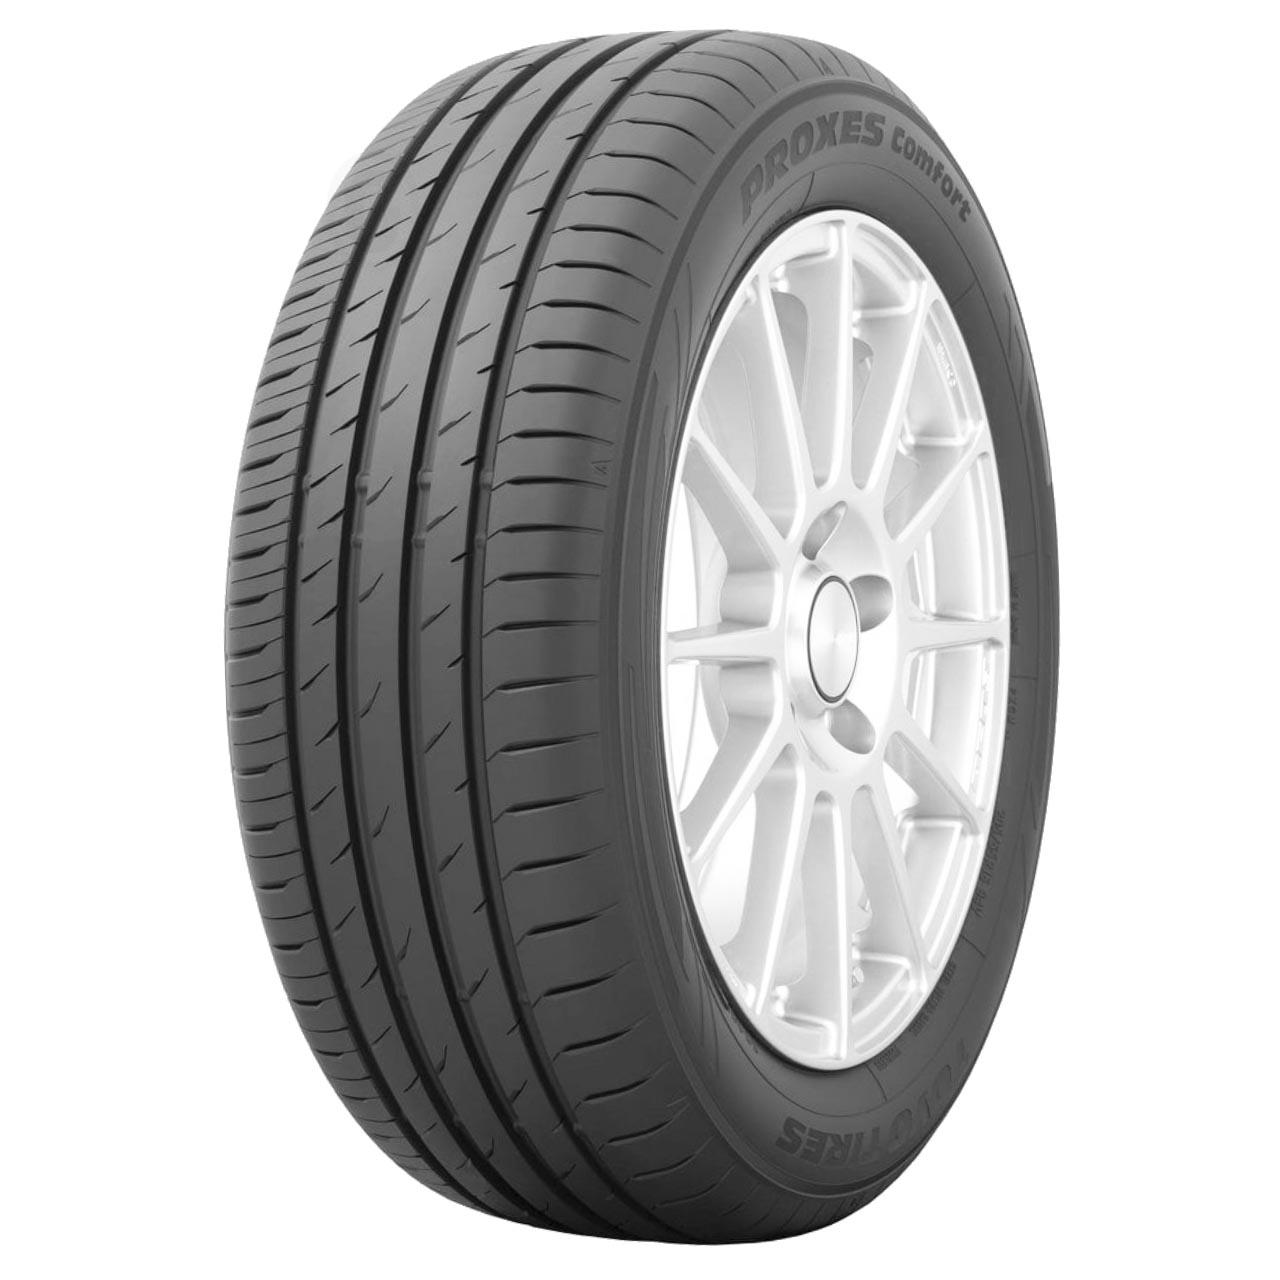 Toyo Proxes Comfort 215/55R16 97W XL